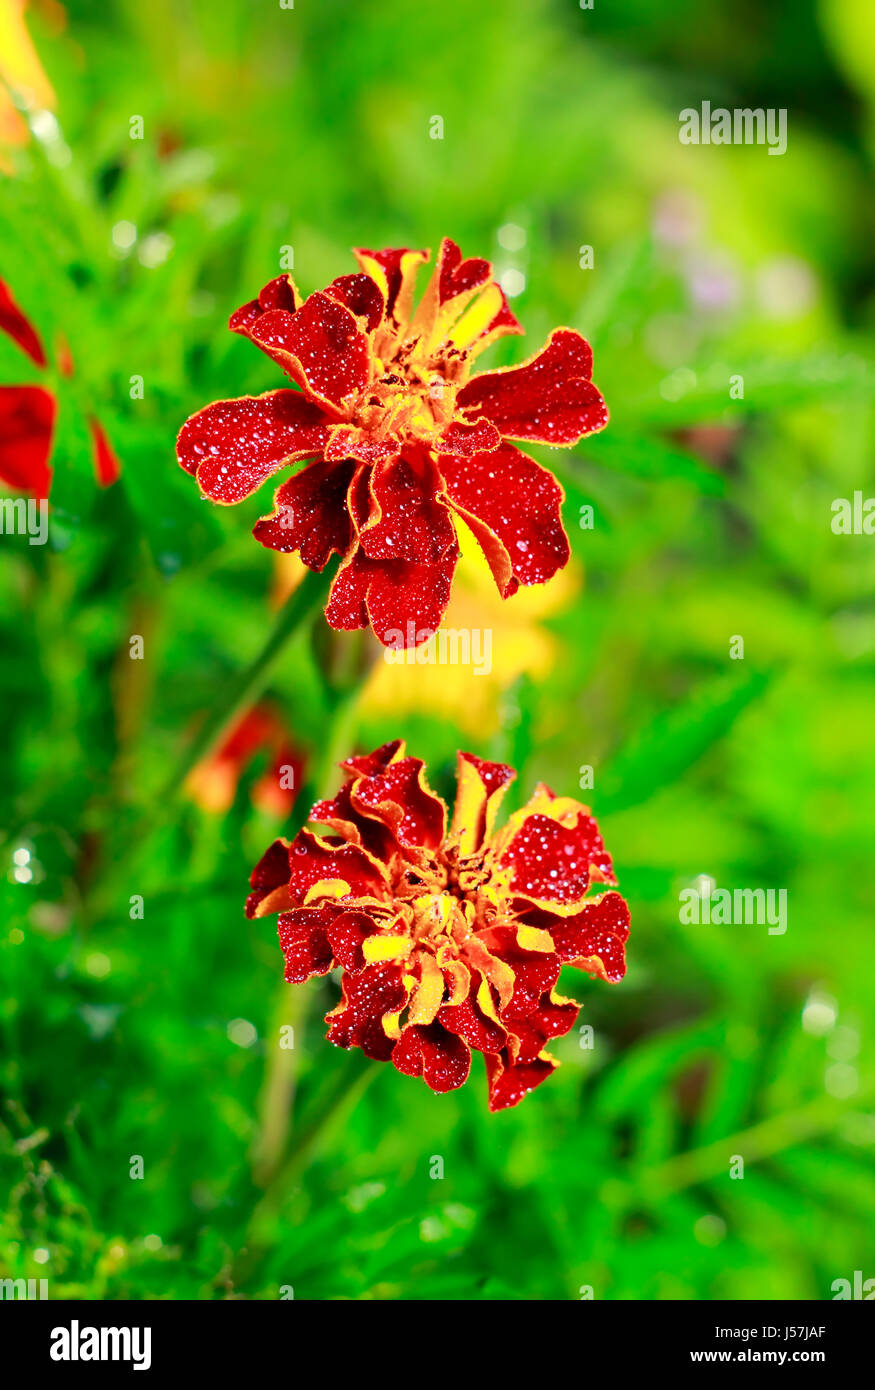 Two Tagetes flowers (Marigold, Mexican marigolds) Stock Photo